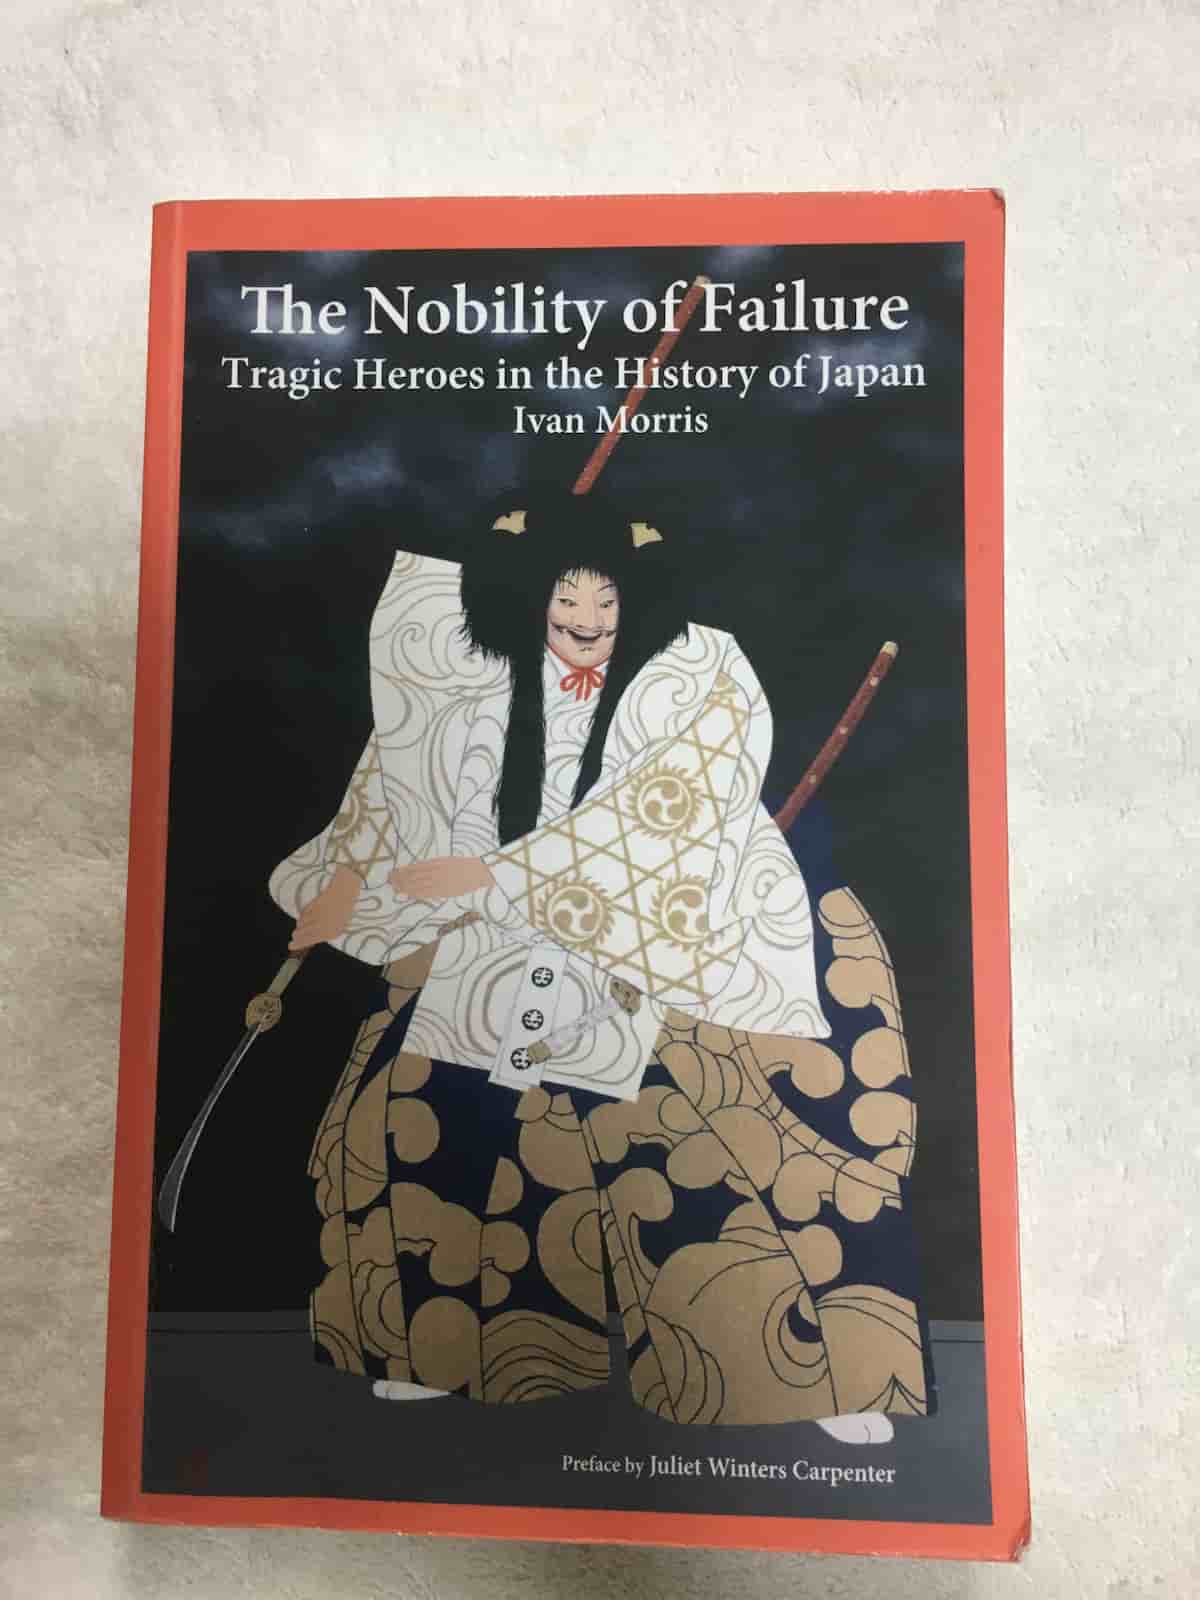 The nobility of failure tragic heroes in the history of Japan